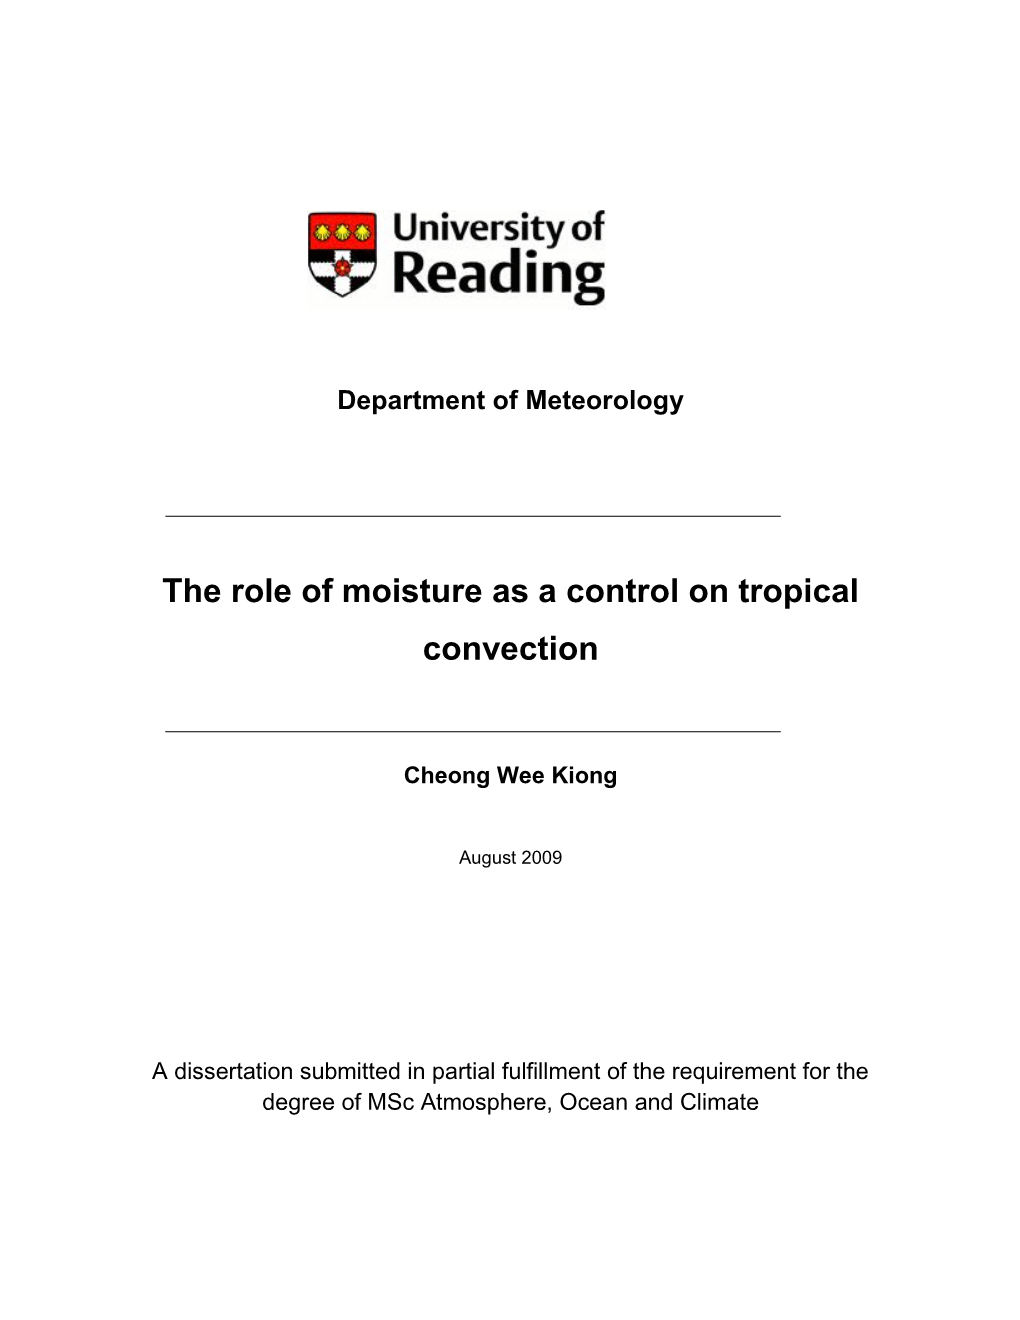 The Role of Moisture As a Control on Tropical Convection